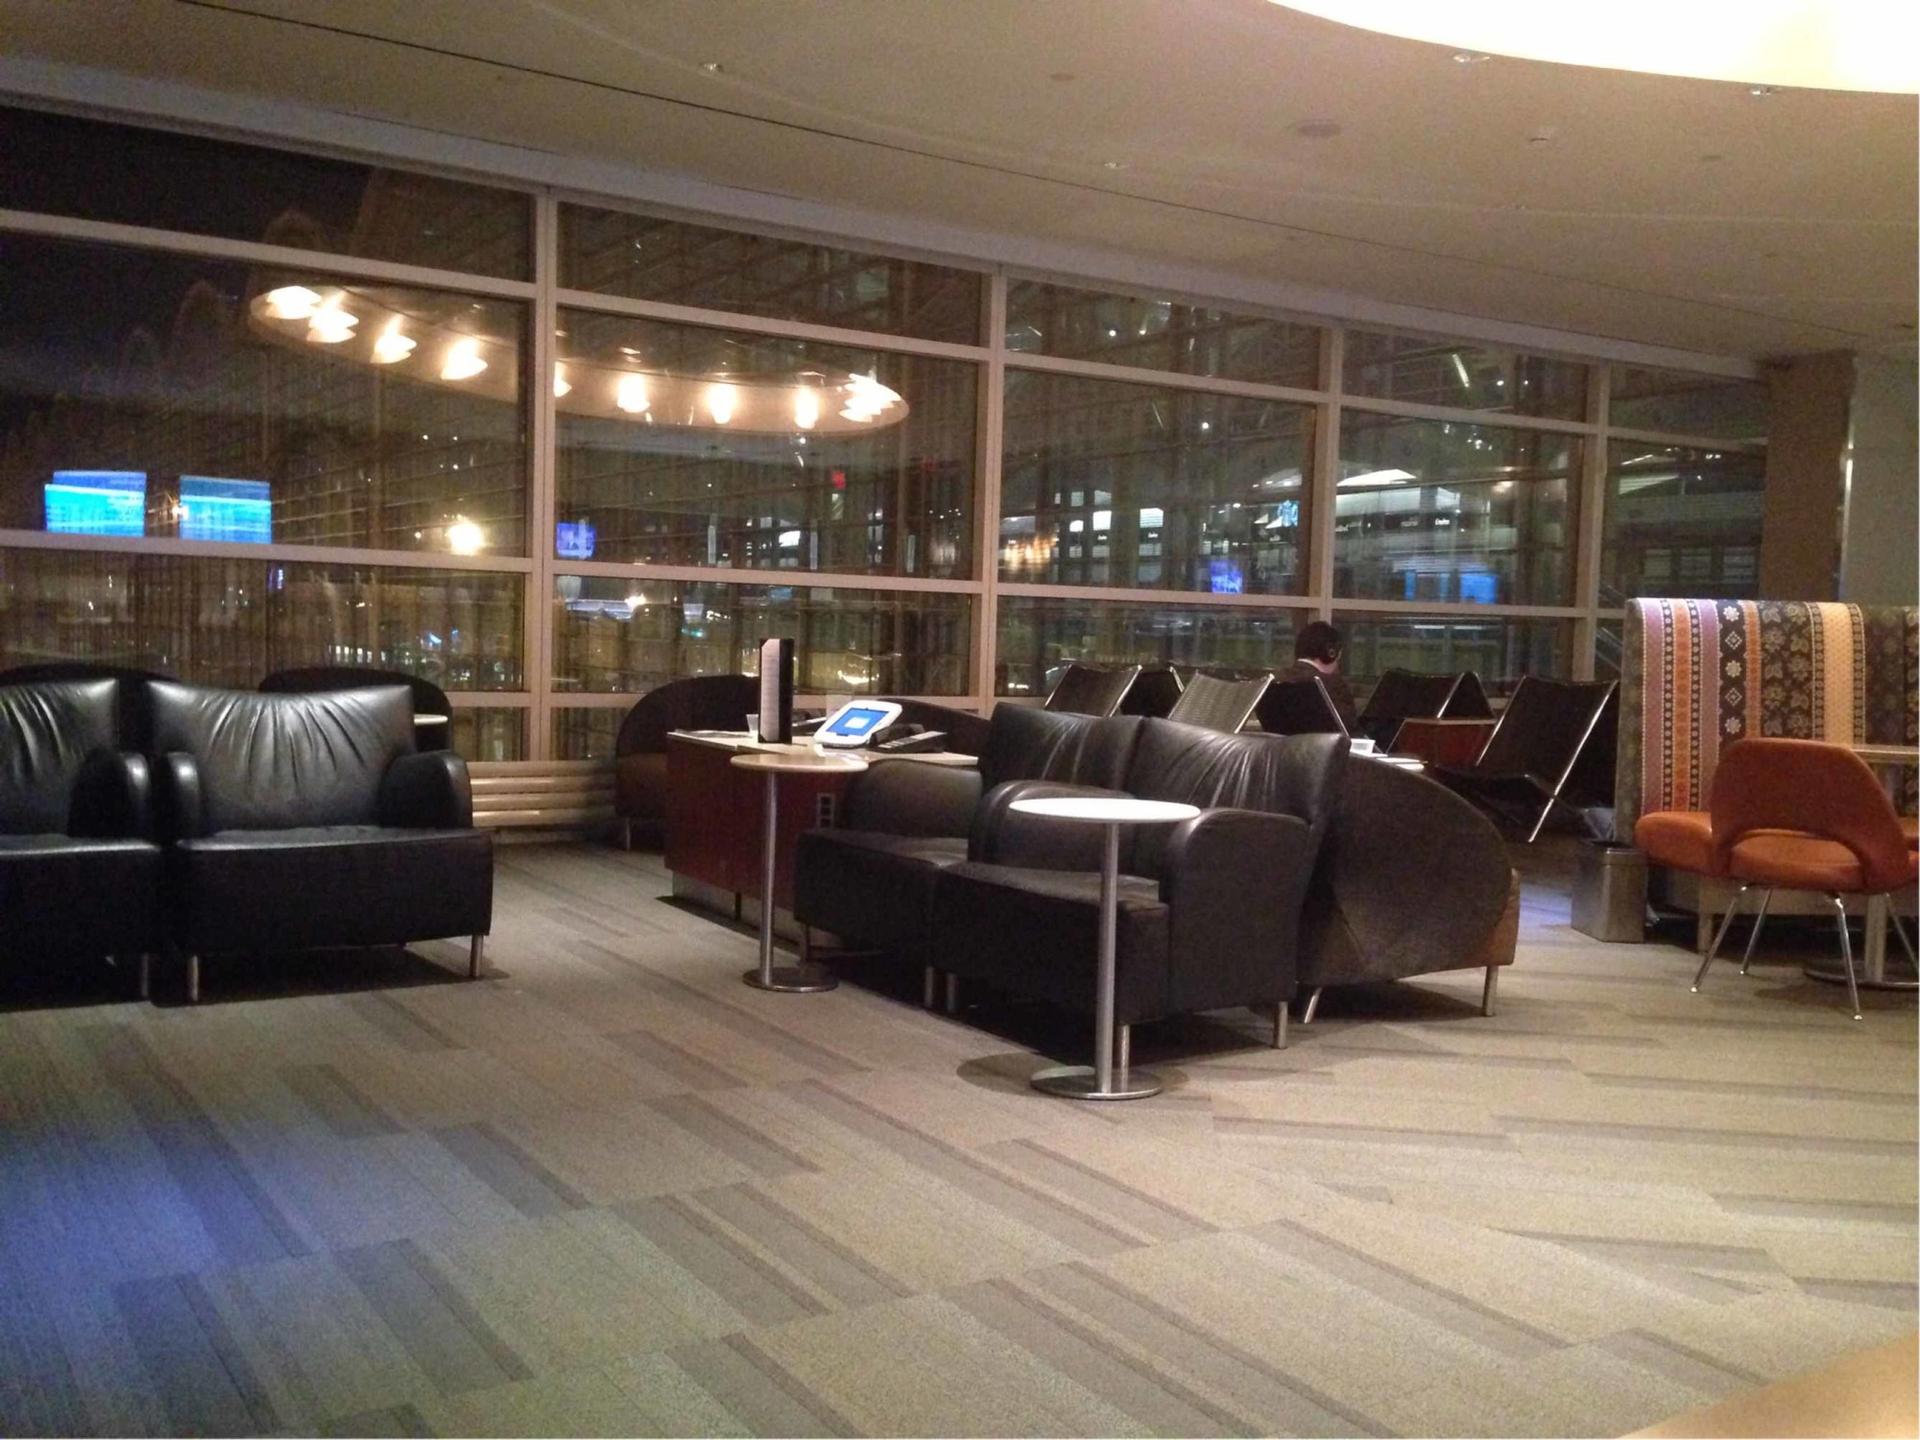 American Airlines Admirals Club image 3 of 22